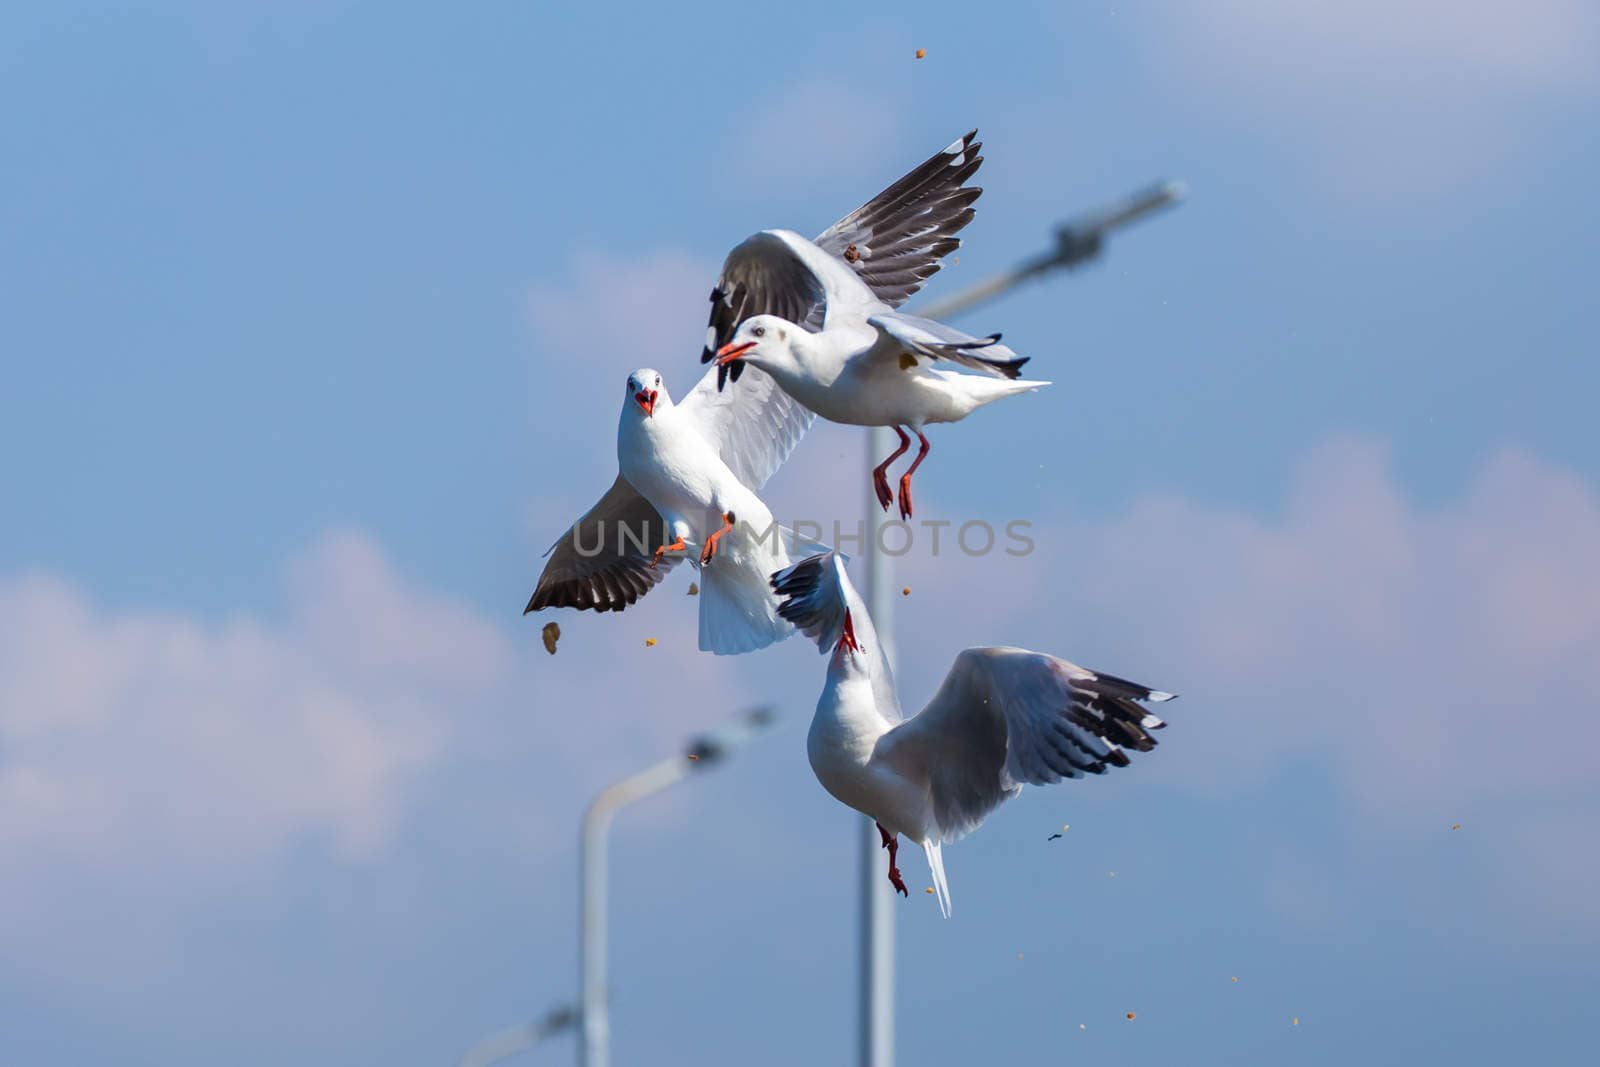 Three seagulls are fighting for seeking some food